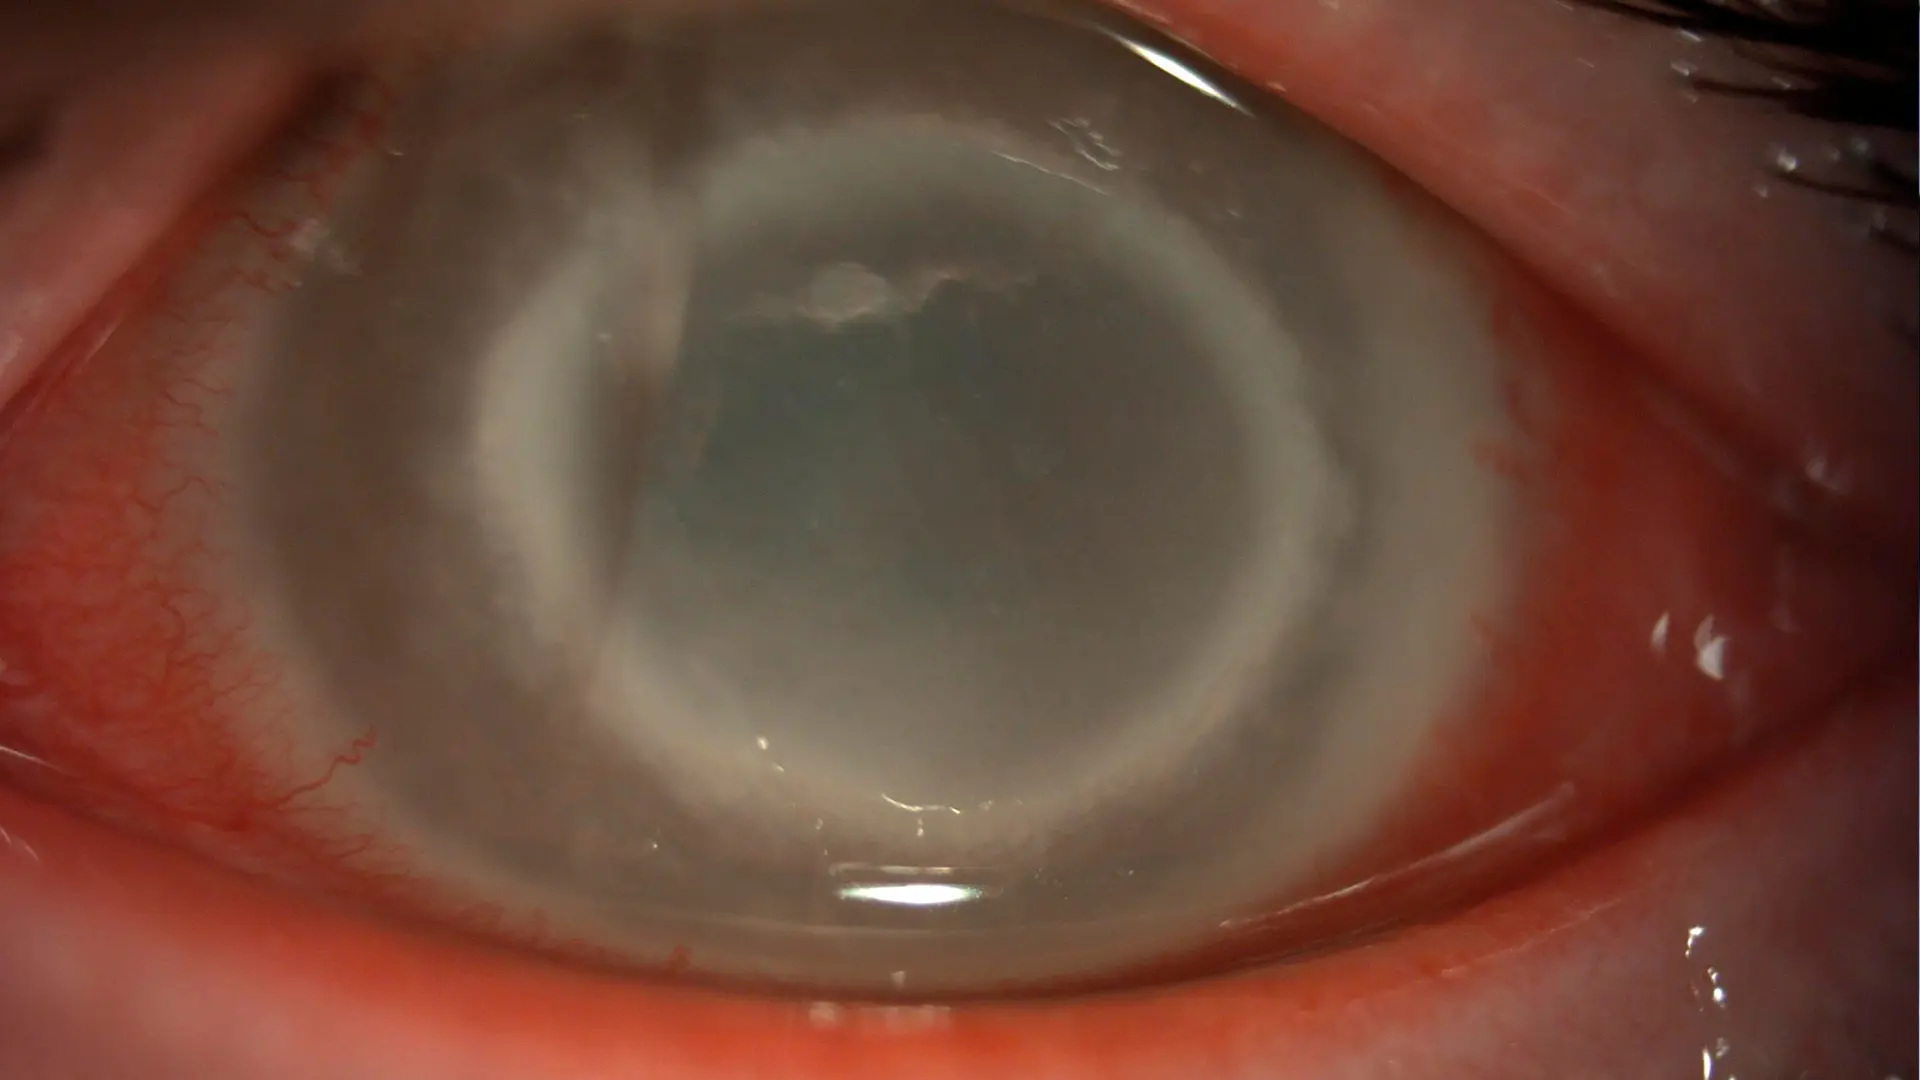 Fulminant acanthamoeba keratitis: Slit lamp photo of the left
 eye demonstrating large corneal ring infiltrate with
 diffuse stromal haze and edema. Visual acuity is 20/250.